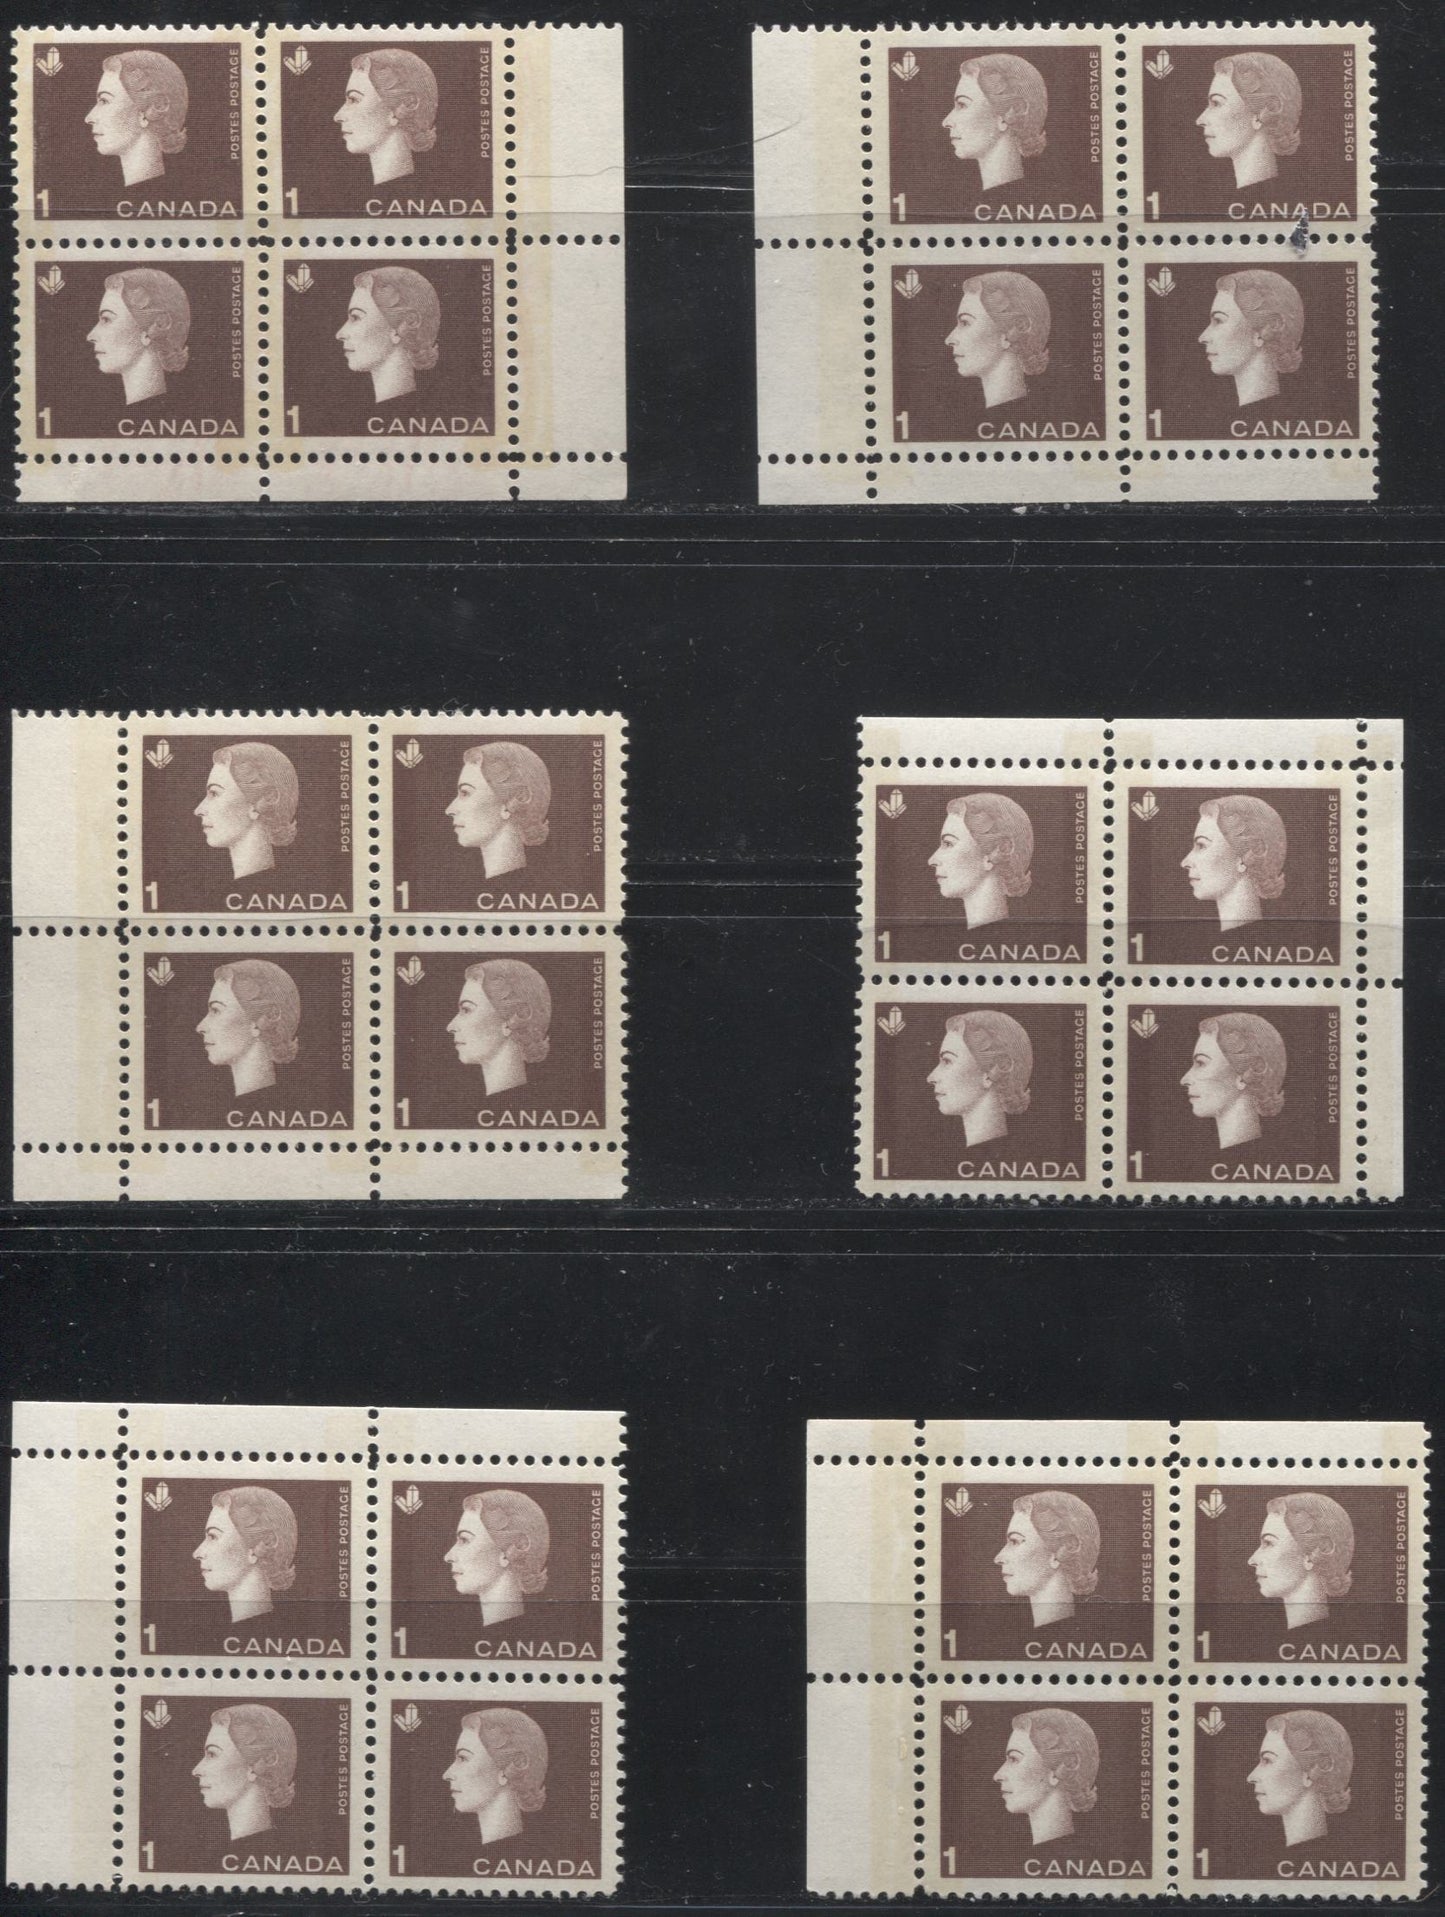 Canada #401p 1c Brown Queen Elizabeth II, 1962-1967 Cameo Issue, A VFNH Group of 6 Winnipeg Tagged Field Stock Corner Blocks With Different Selvedge Widths, Shades and Tagging Strengths, All on DF Paper